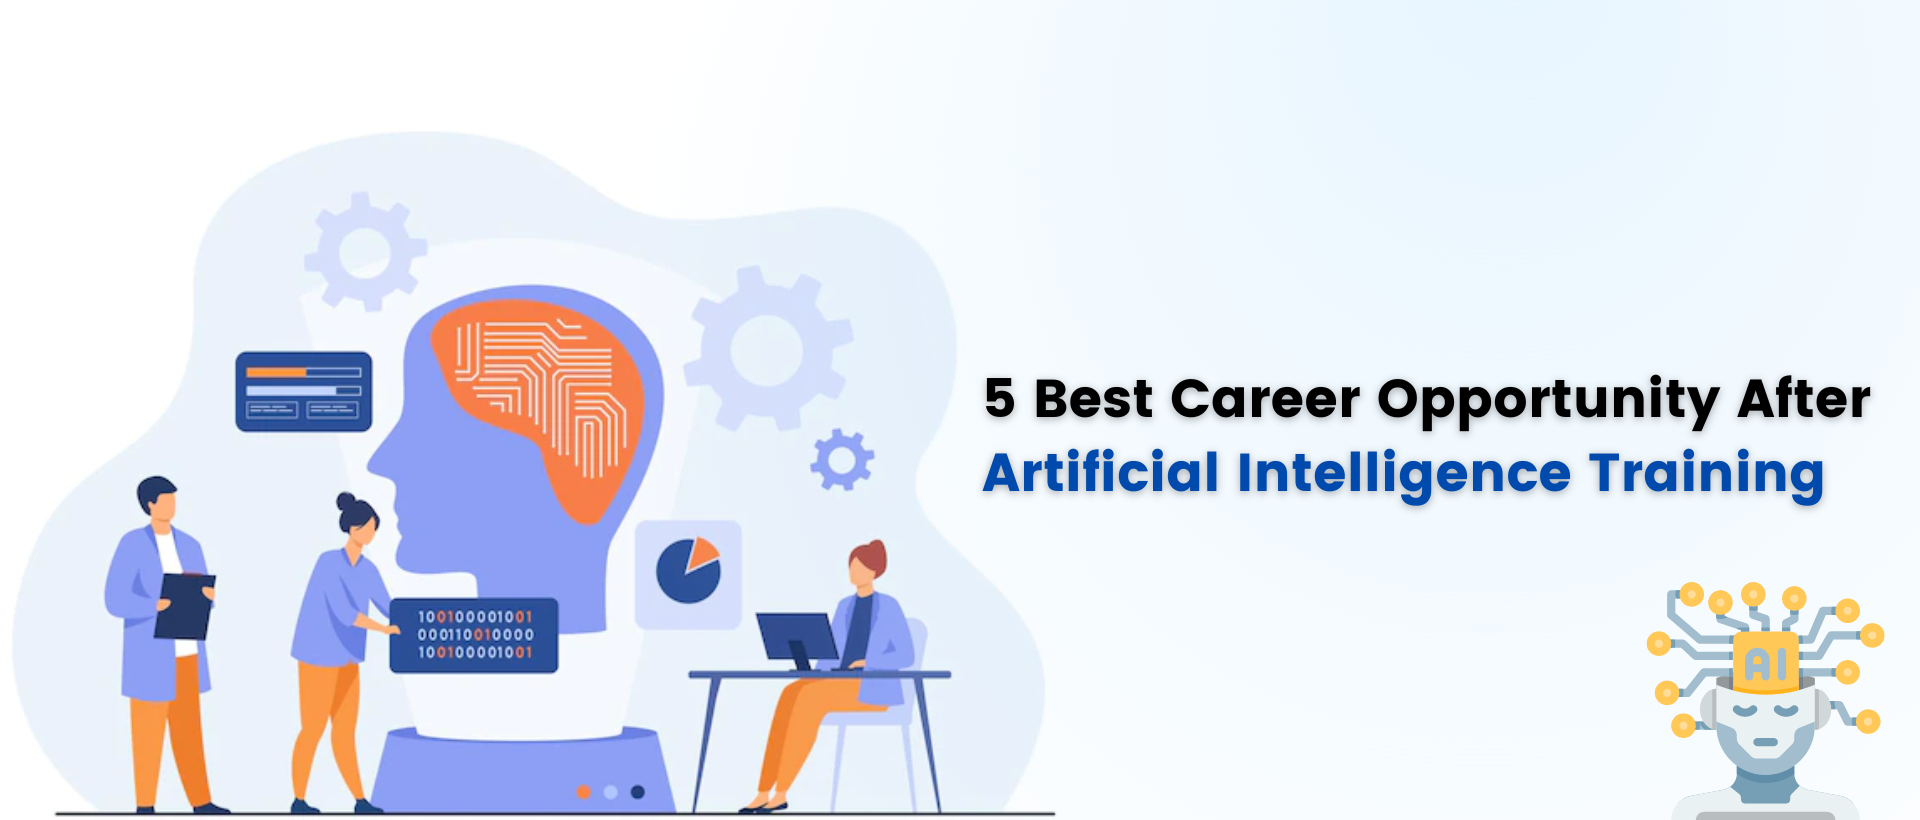 5 Best Career Opportunity After Artificial Intelligence Training